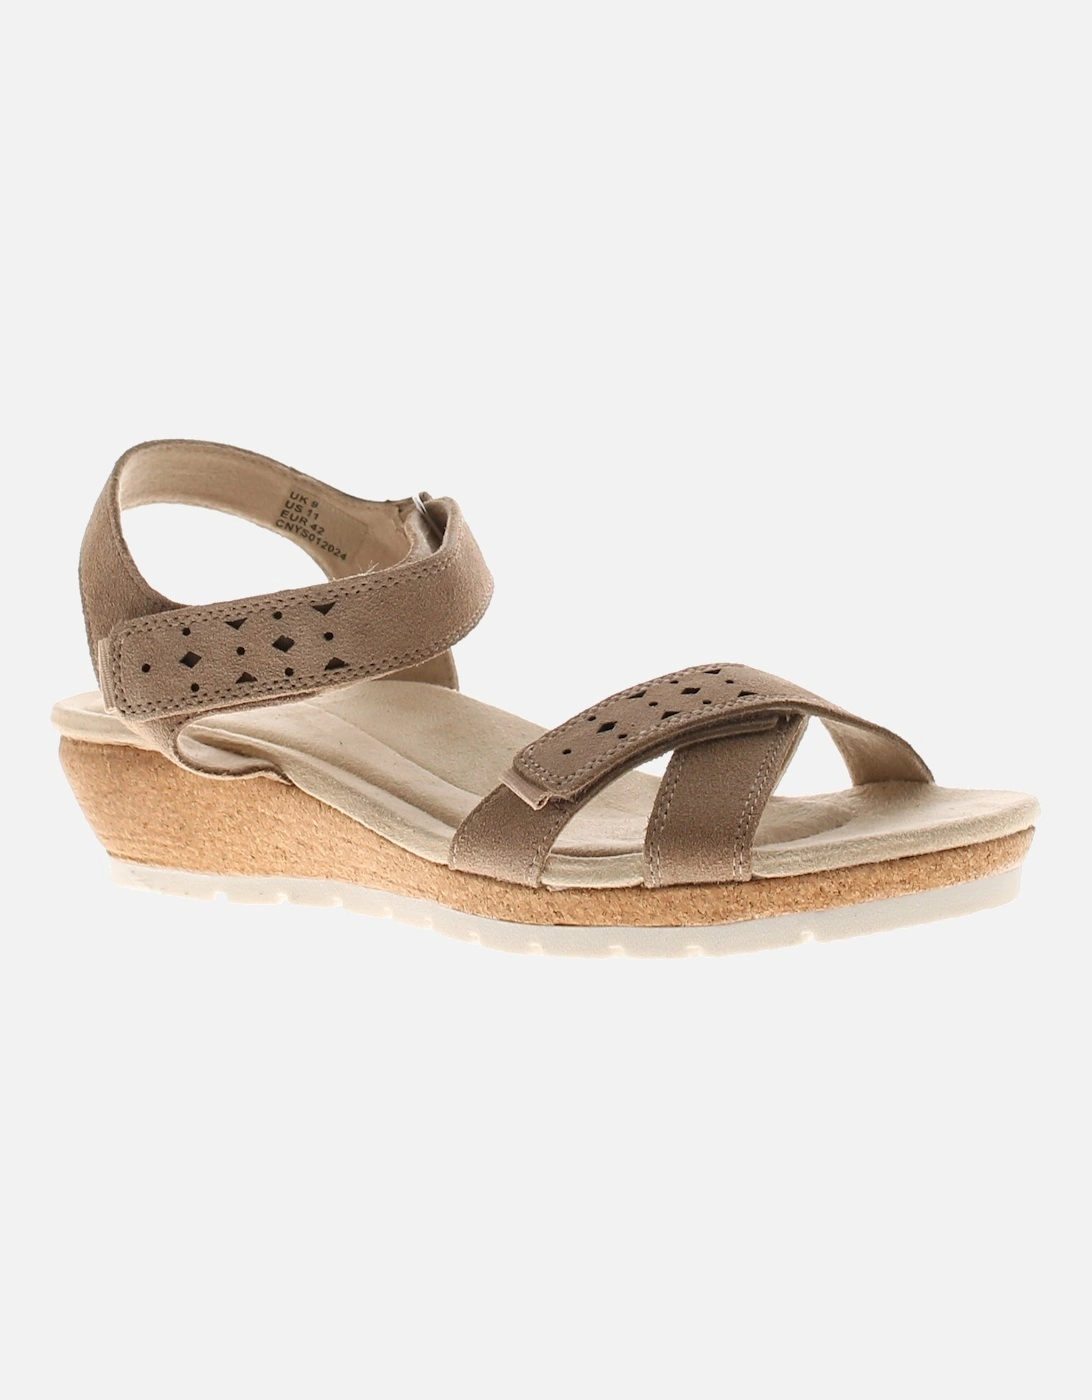 Free Spirit Womens Sandals Low Wedge Kit Touch Fastening taupe UK Size, 6 of 5